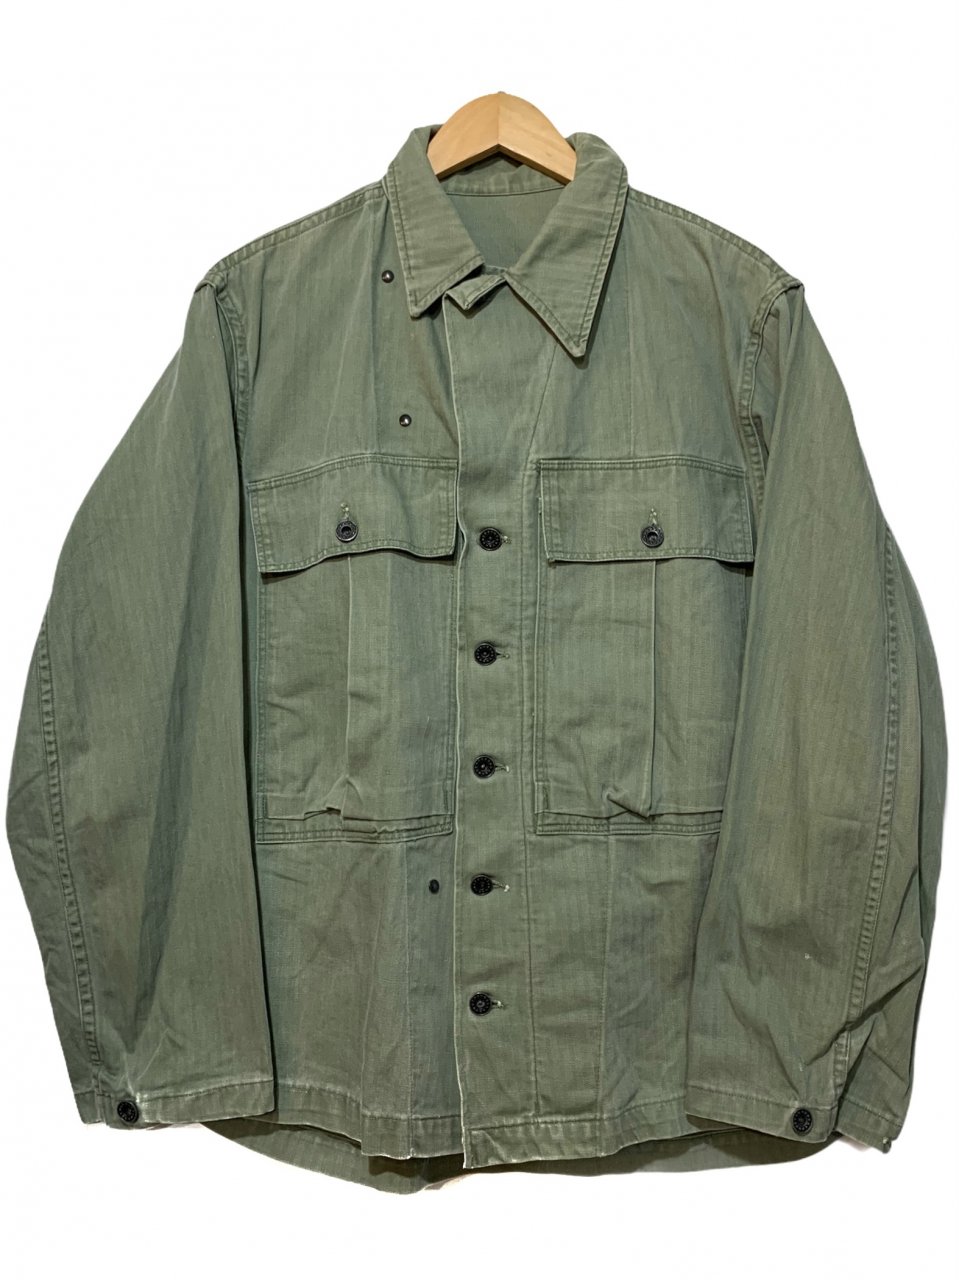 40's US.Army M-43 HBT Jacket 米軍 ミリタリー